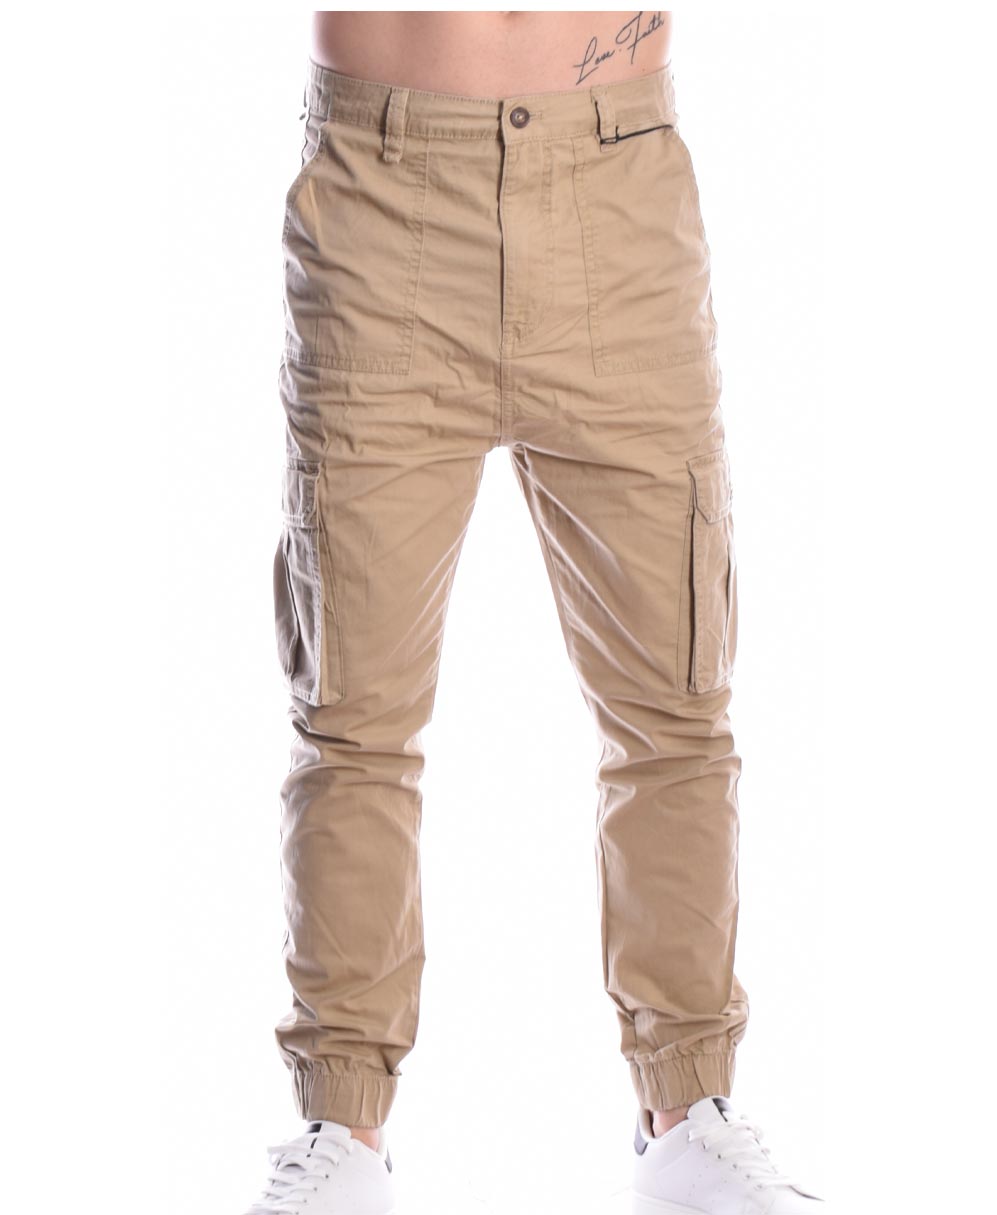 beige cargo jogger loose fit pants mpez made in italy